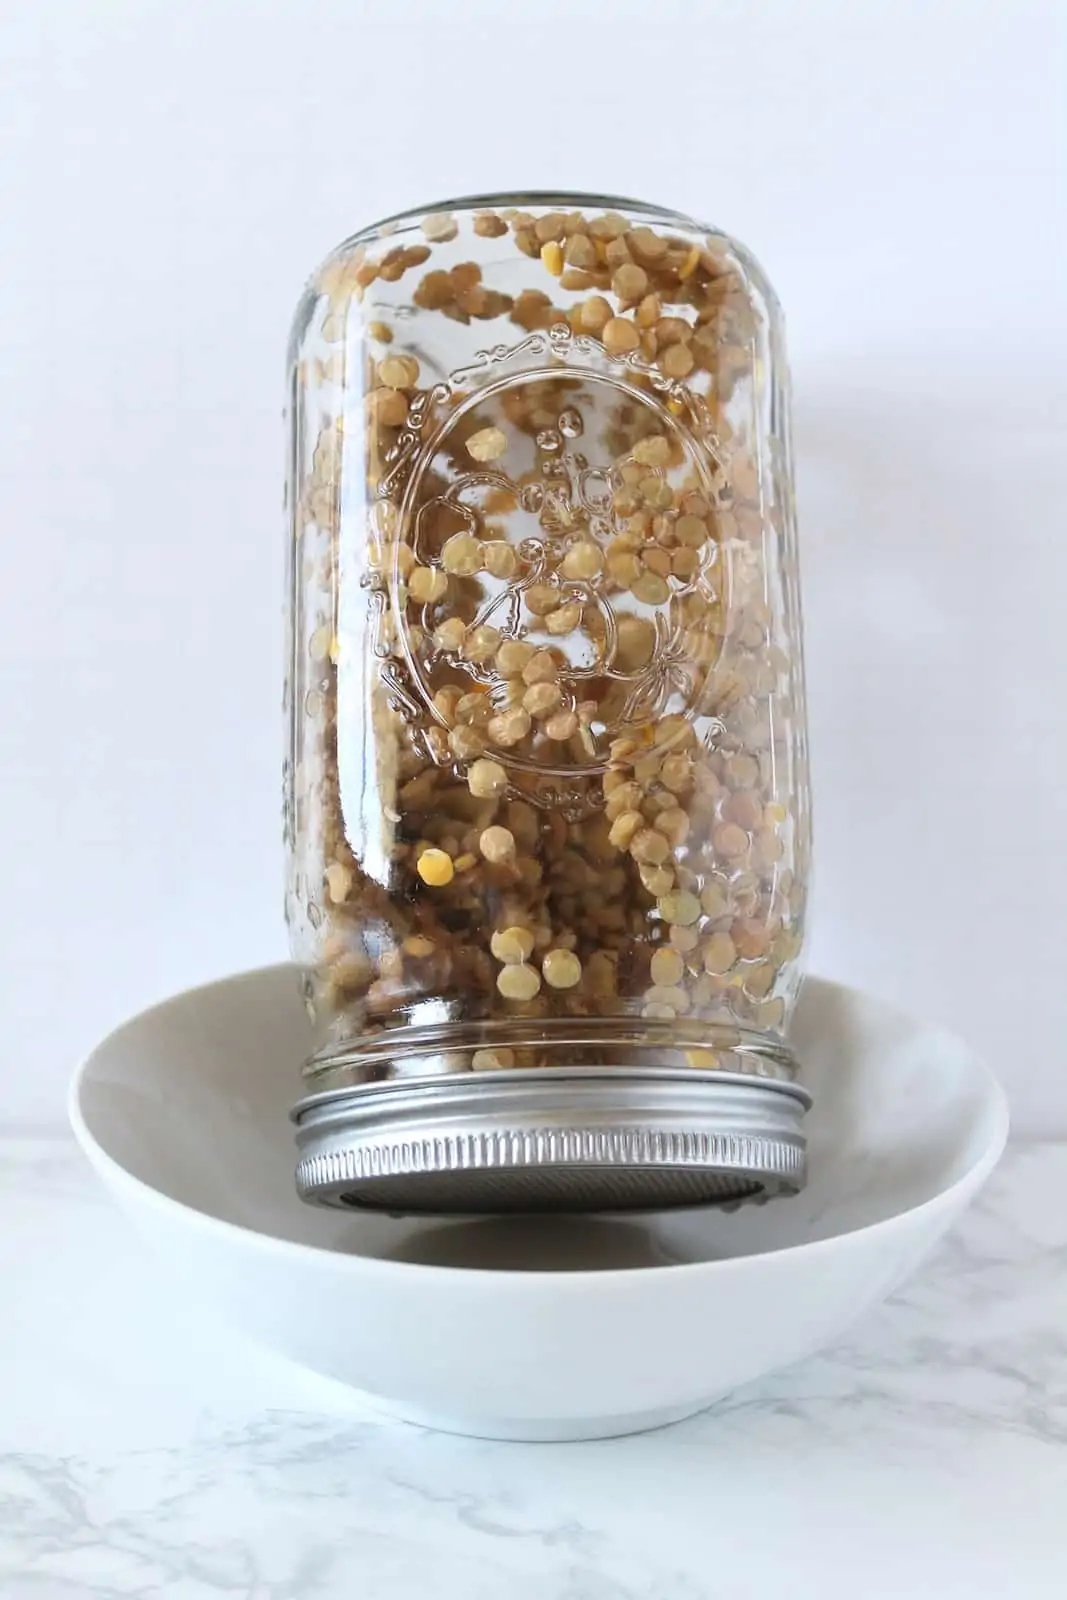 Upside down mason jar filled with brown lentils with a sprouting lid on it resting in a white bowl